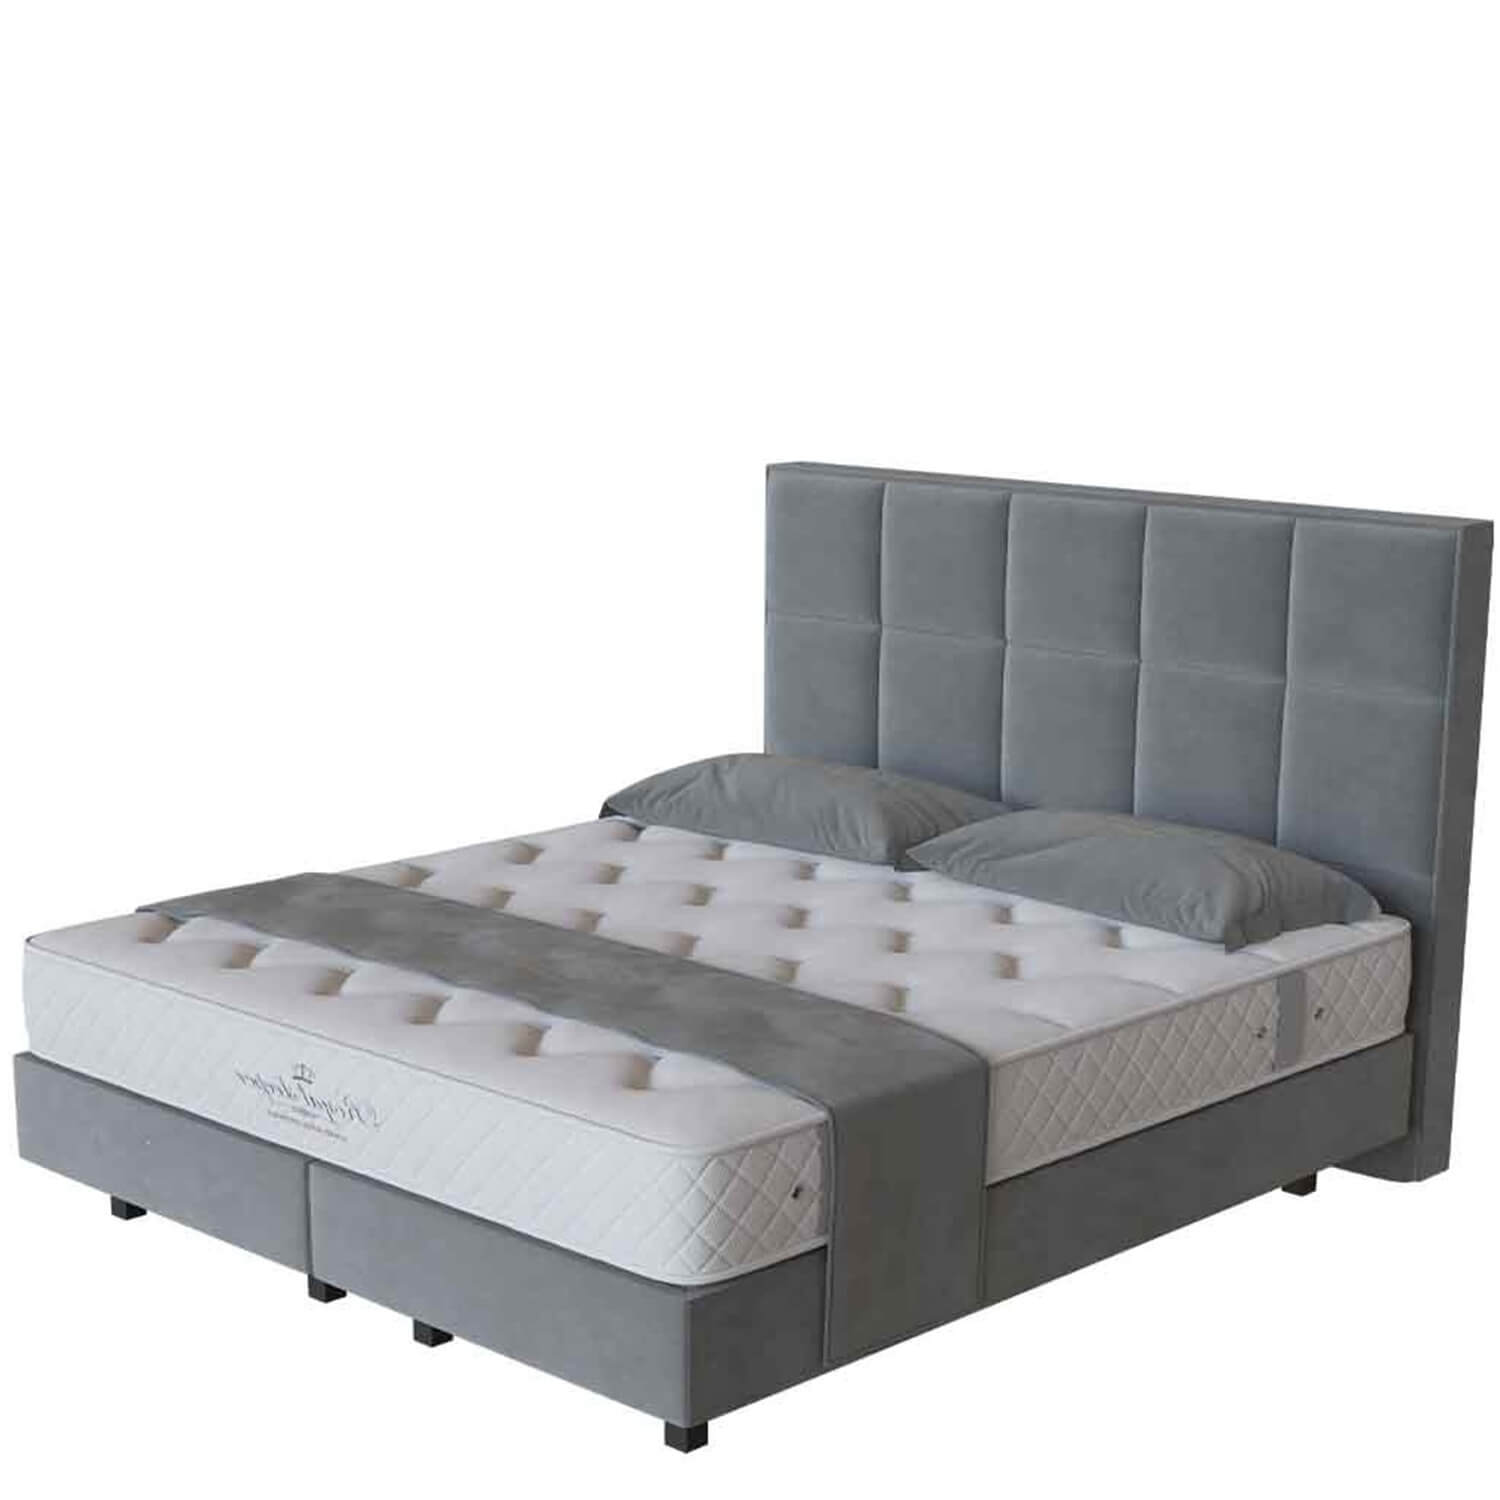 Square bed